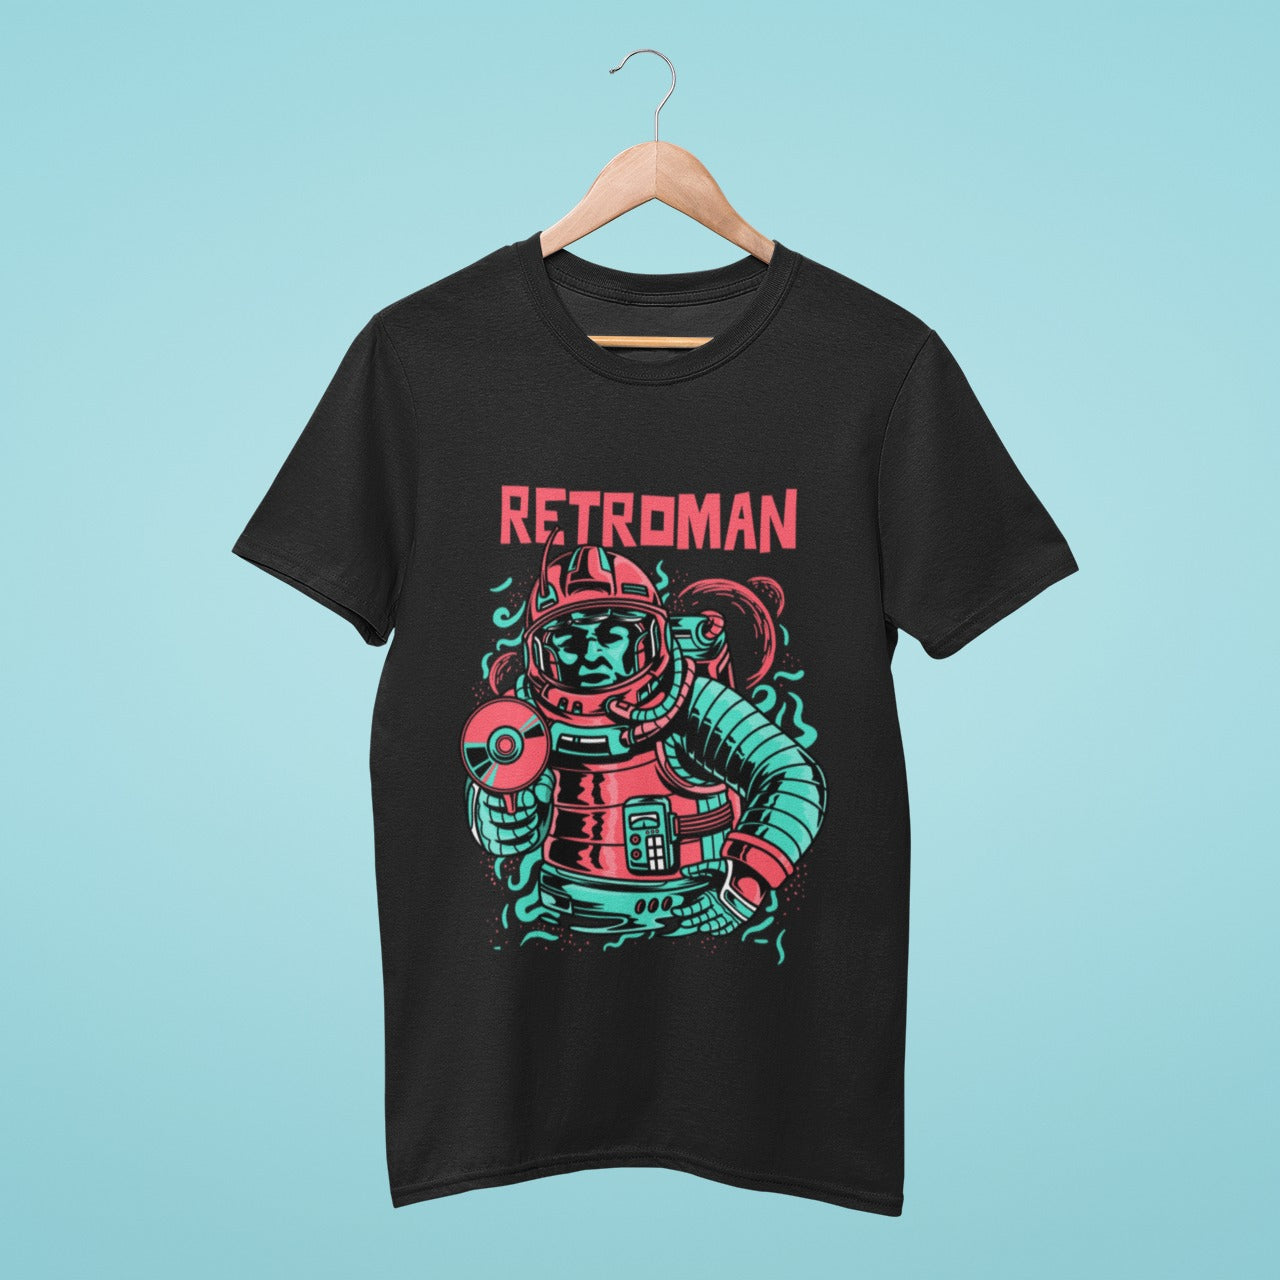 Show off your love for all things retro with this black Retroman t-shirt. Featuring a space-suited man armed with a CD-like gun, it's perfect for fans of classic gaming and sci-fi. Wear it to show your appreciation for the classics, and let everyone know that you're a true retrogaming enthusiast.